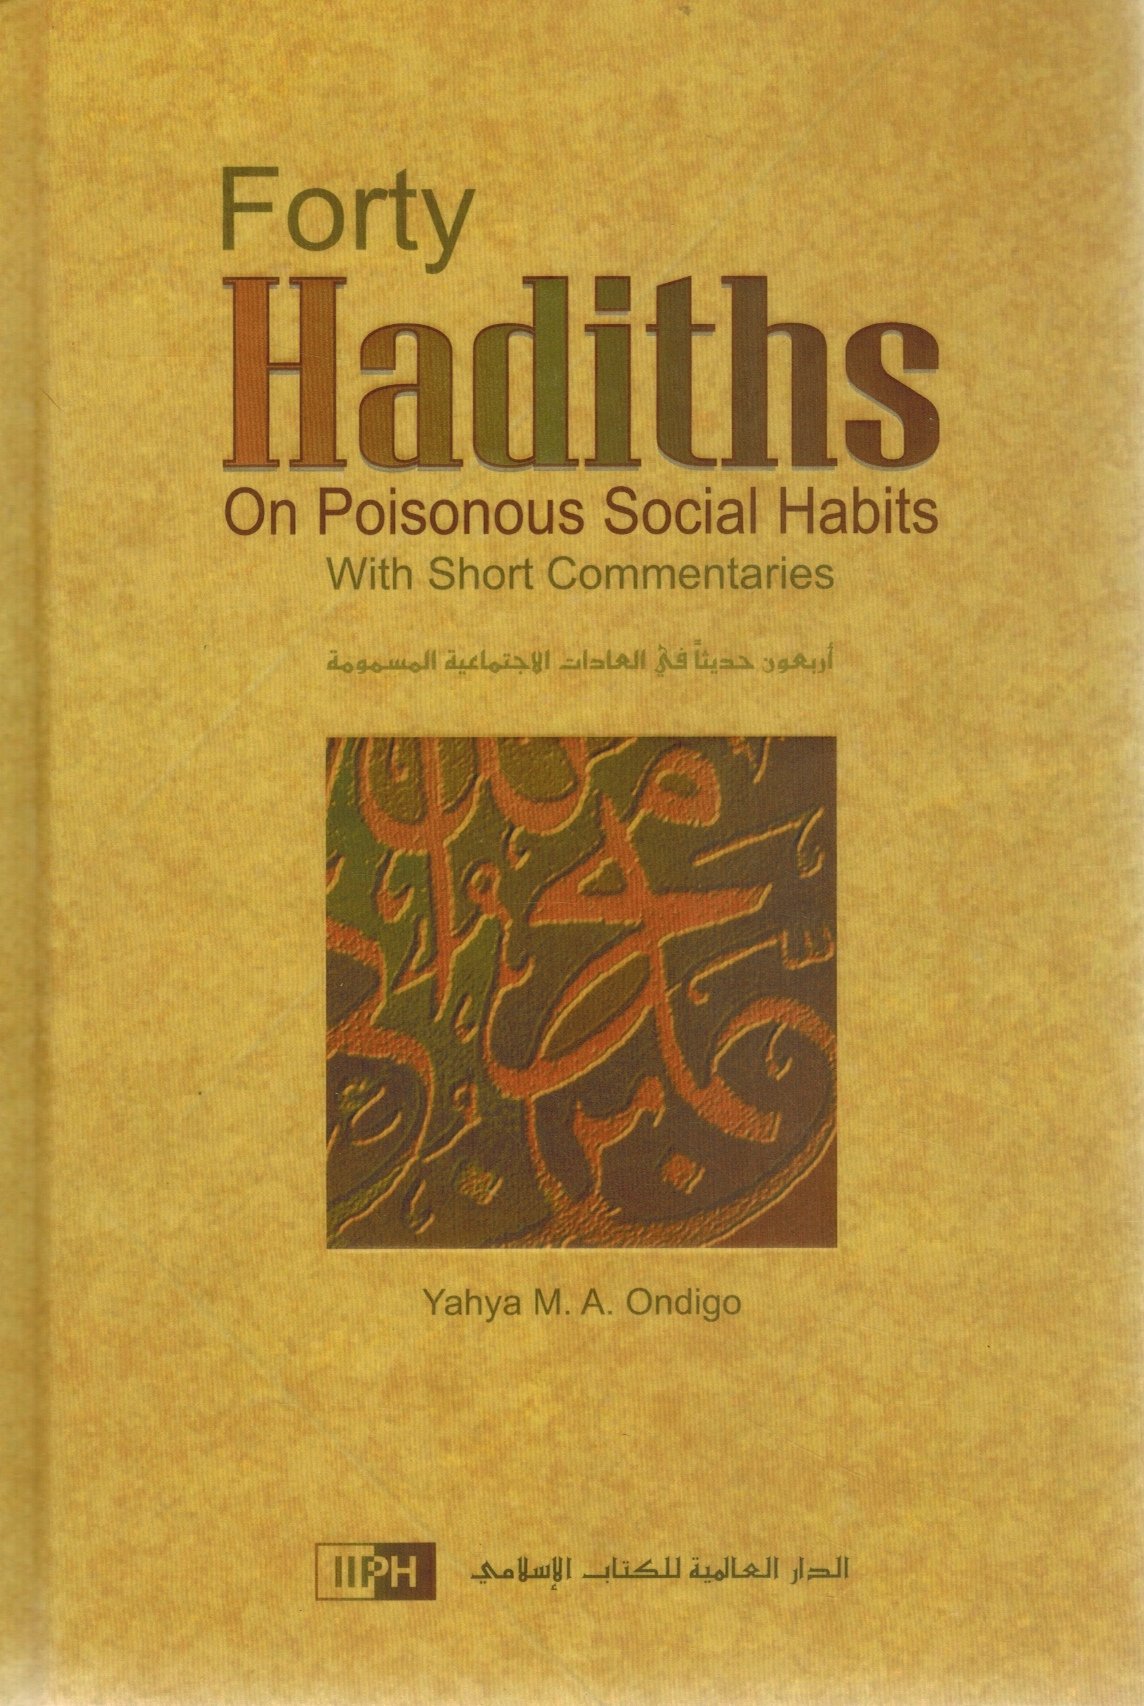 FORTY HADITHS ON POISONOUS SOCIAL HABITS  by Yahya M. A. Ondigo